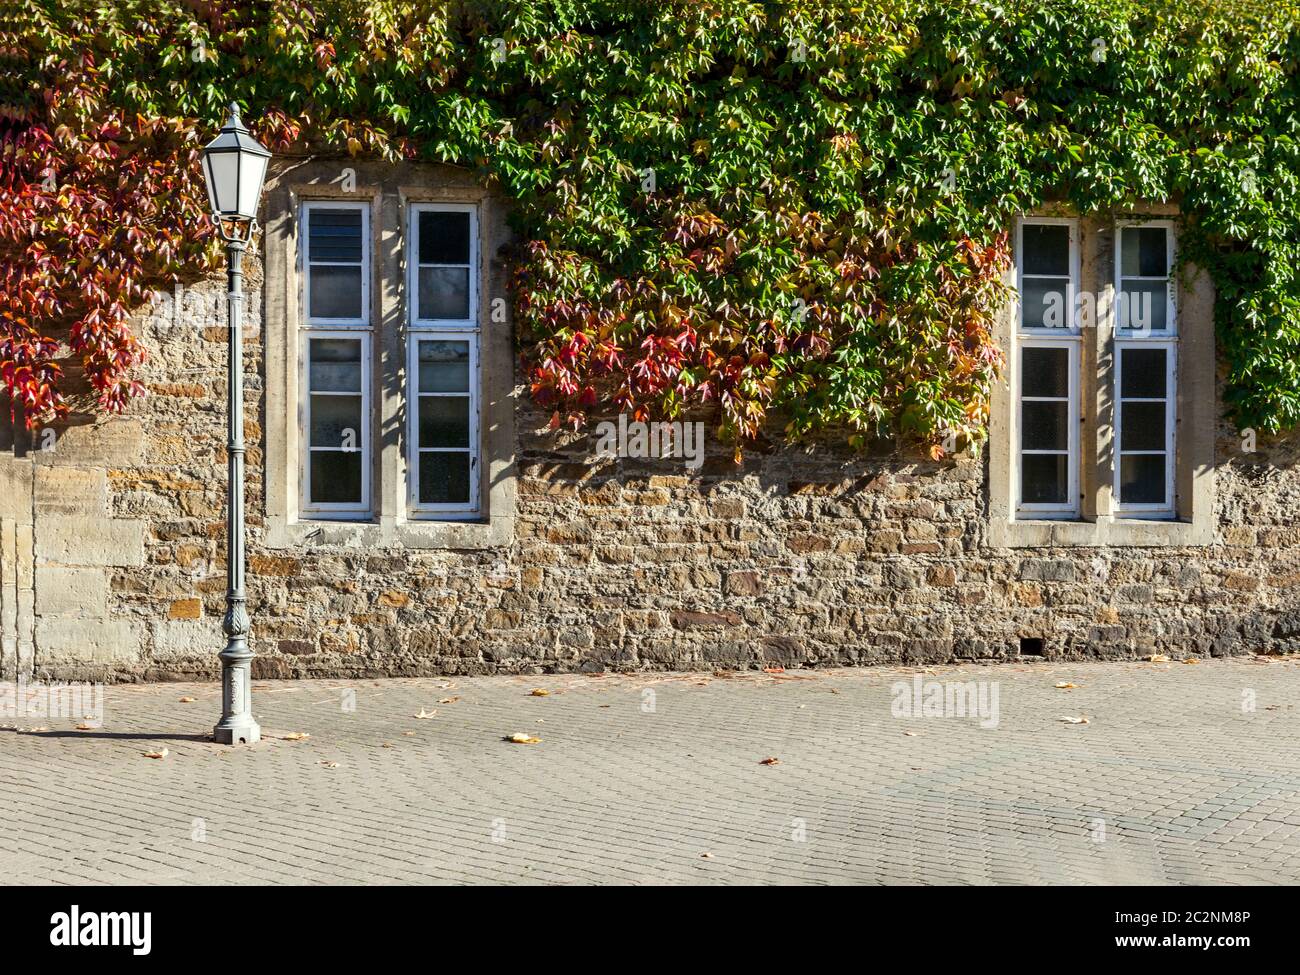 Outdoor view of green ivy fixed at the corner of an ancient stone wall house. Stock Photo